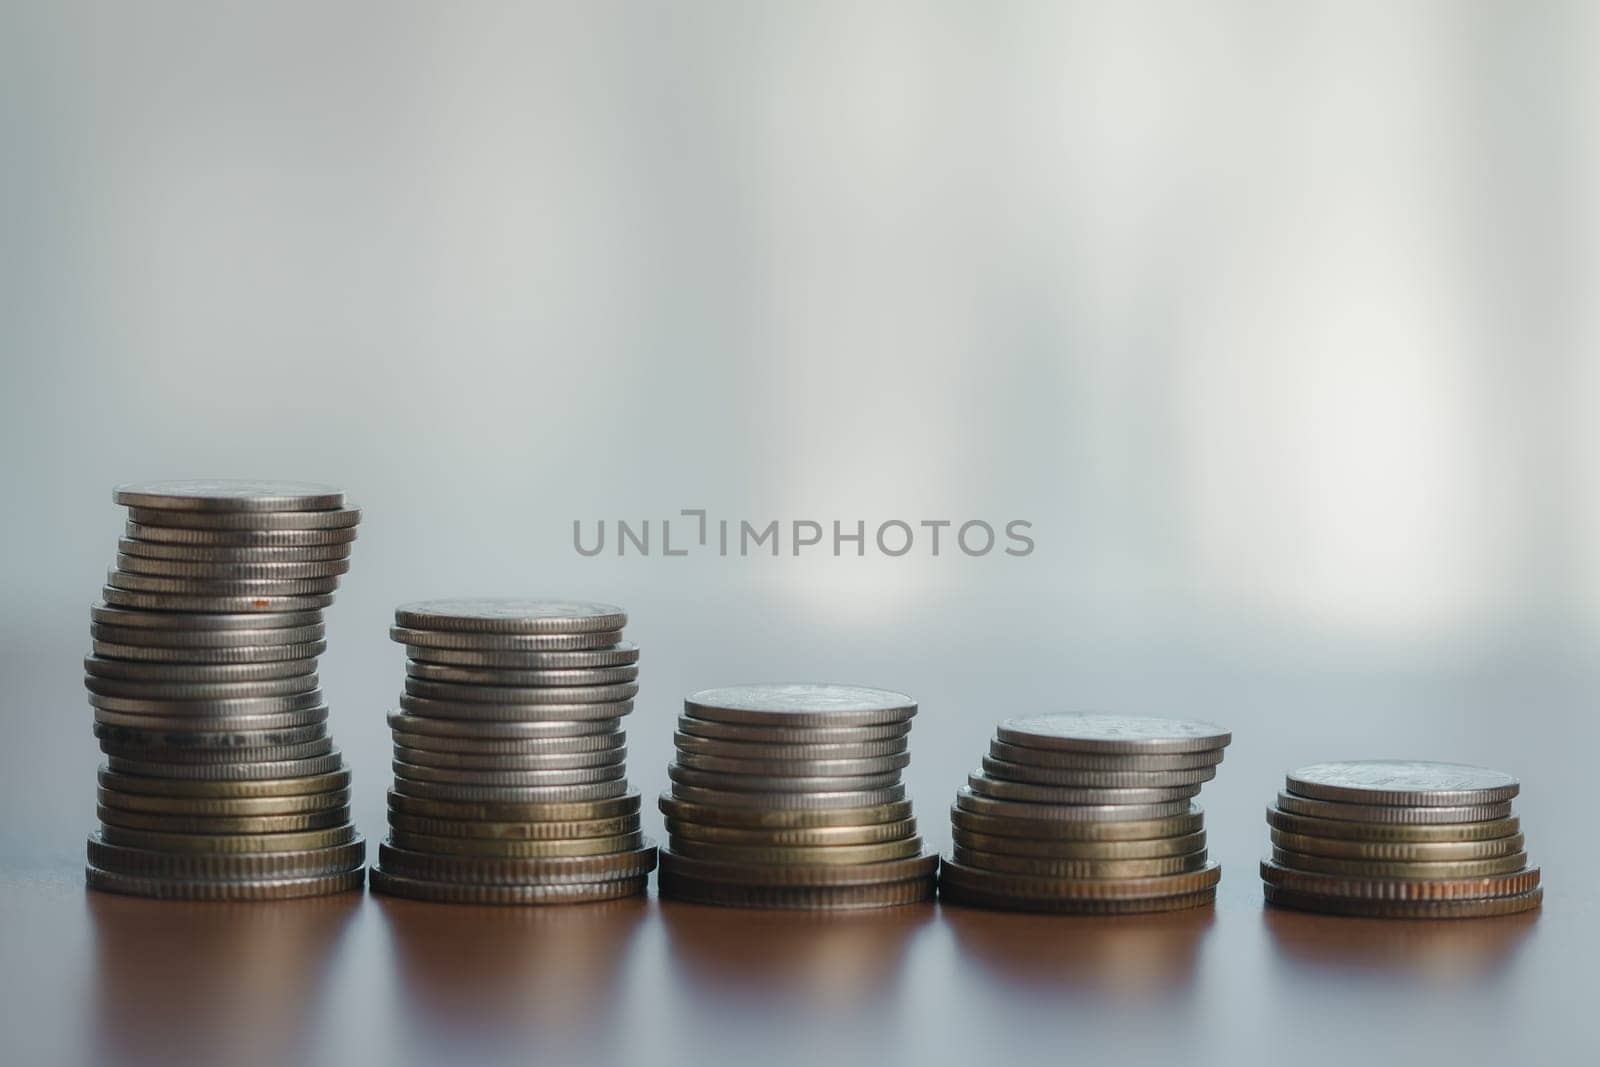 Coins stacked on each other in a row, business and finance concept by iamnoonmai